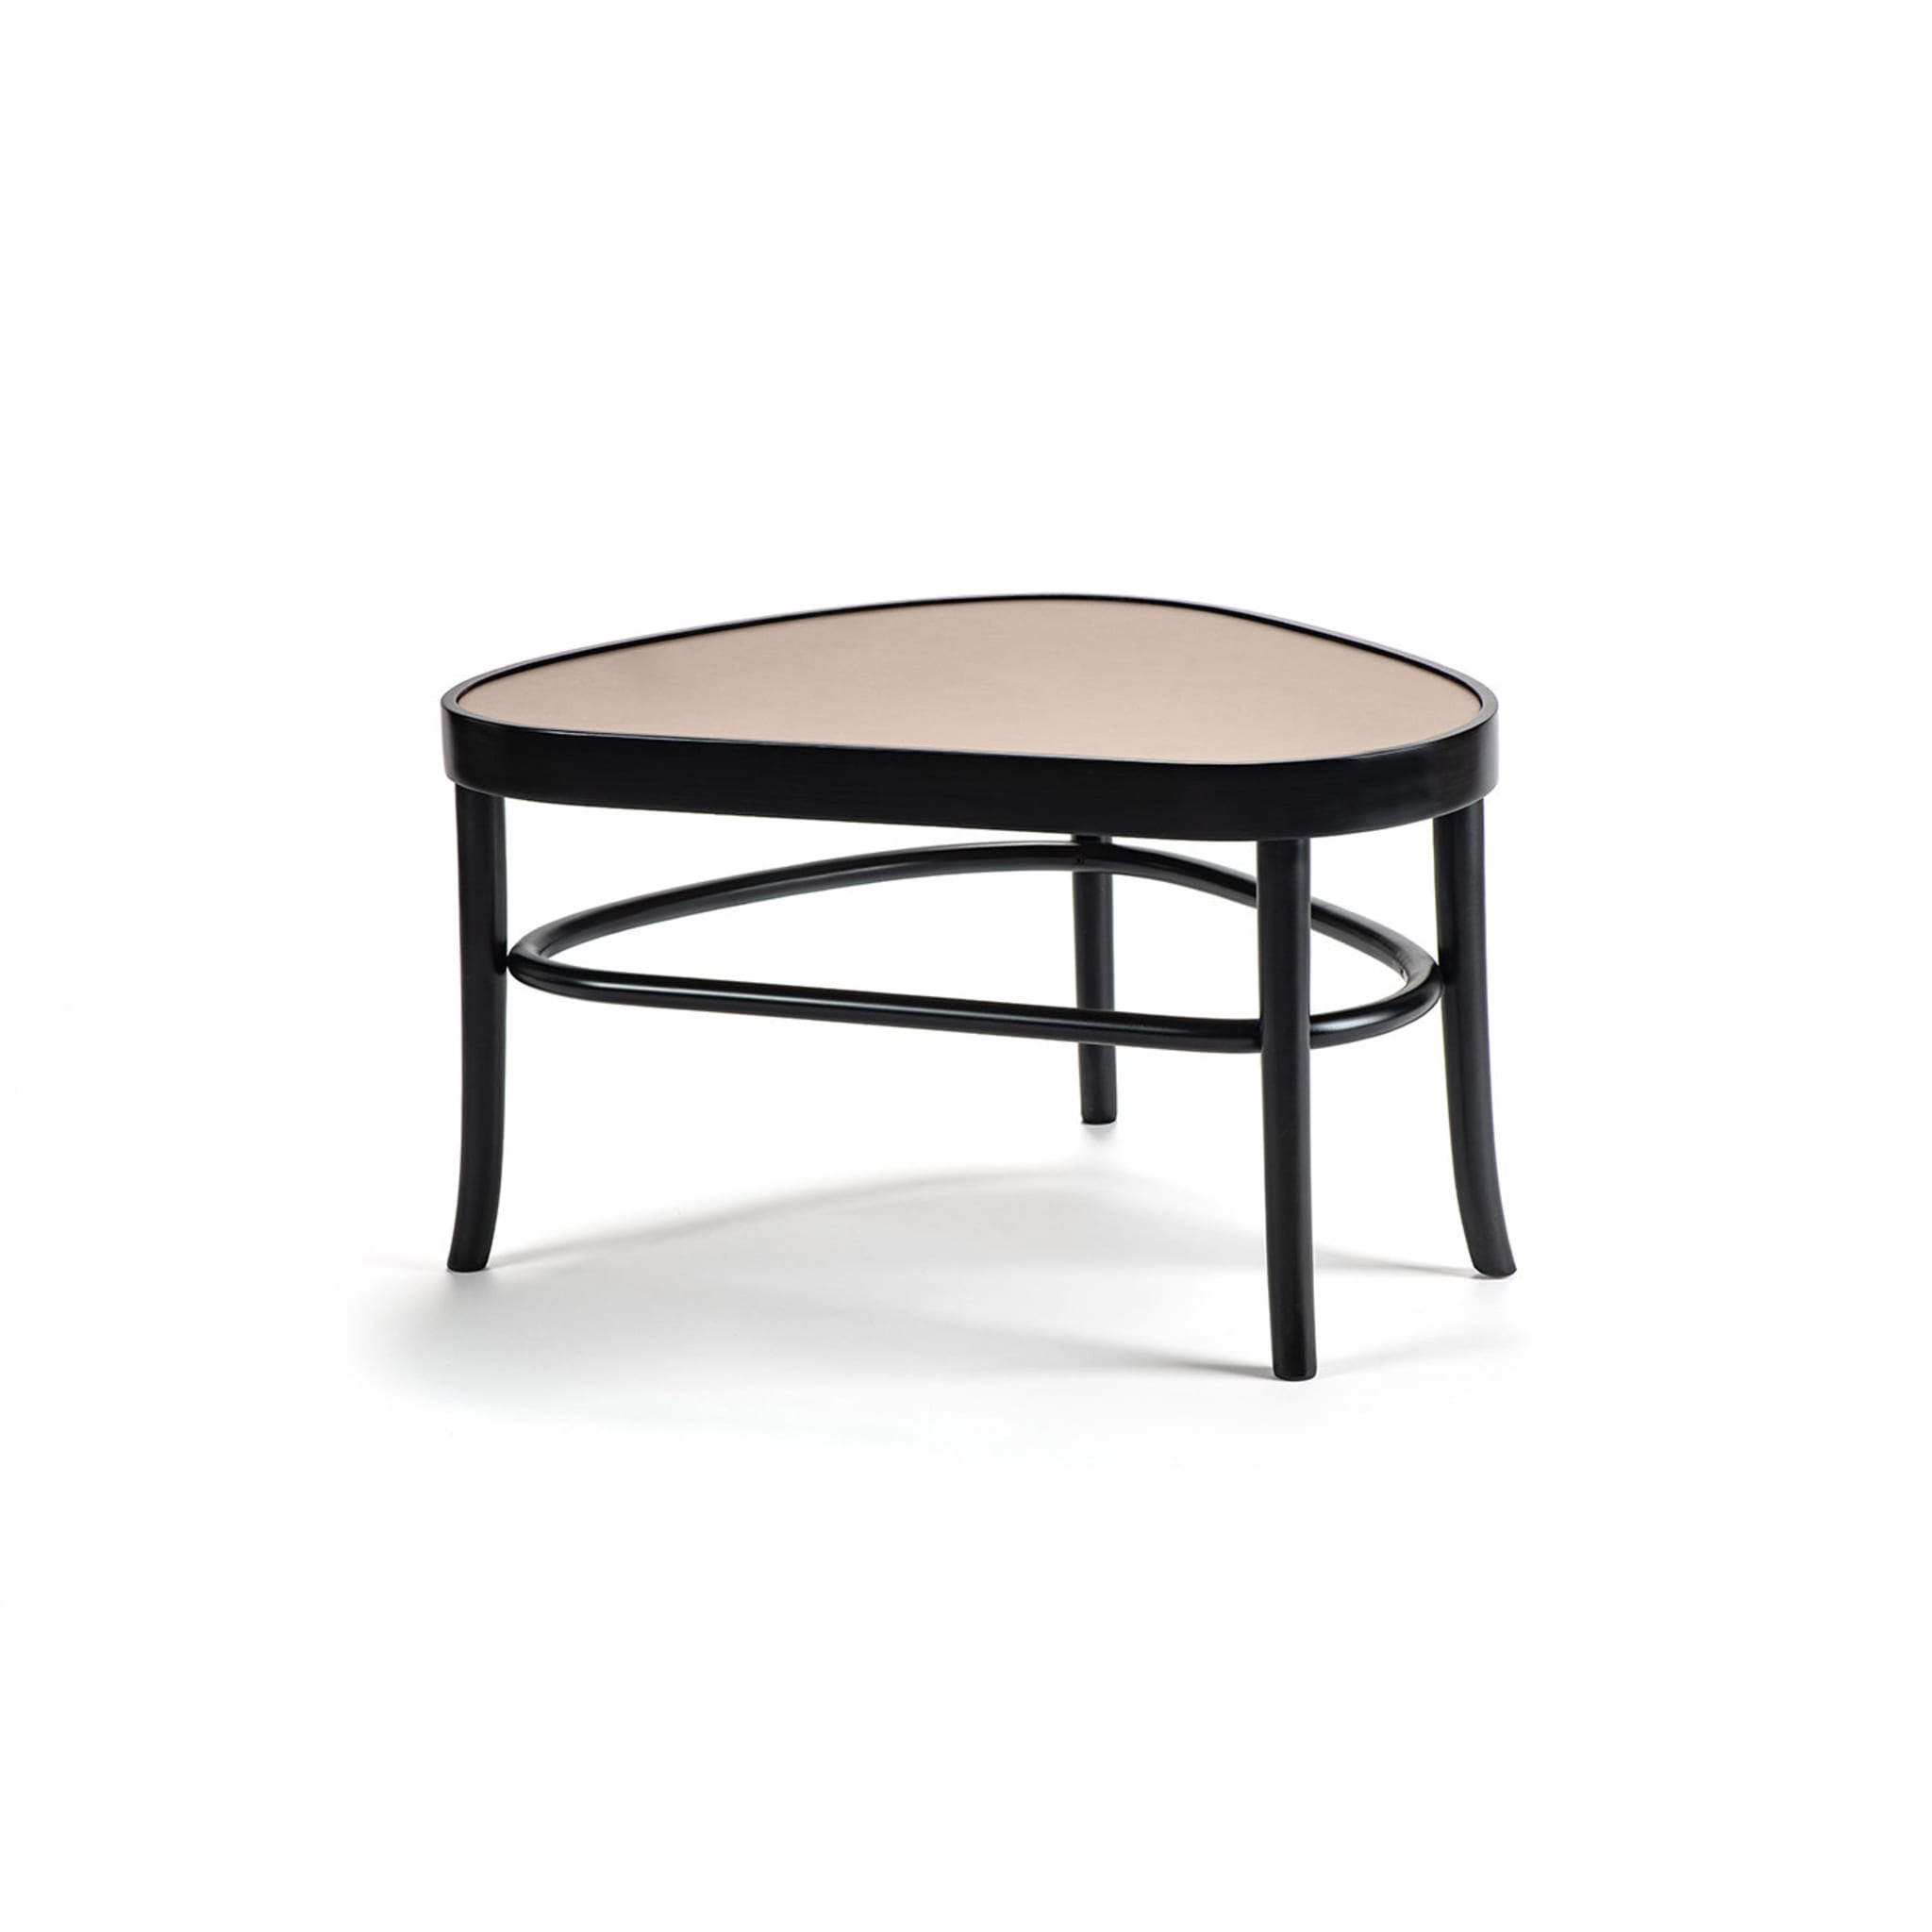 Small Peers Coffee Table by Front - Alternative view 2